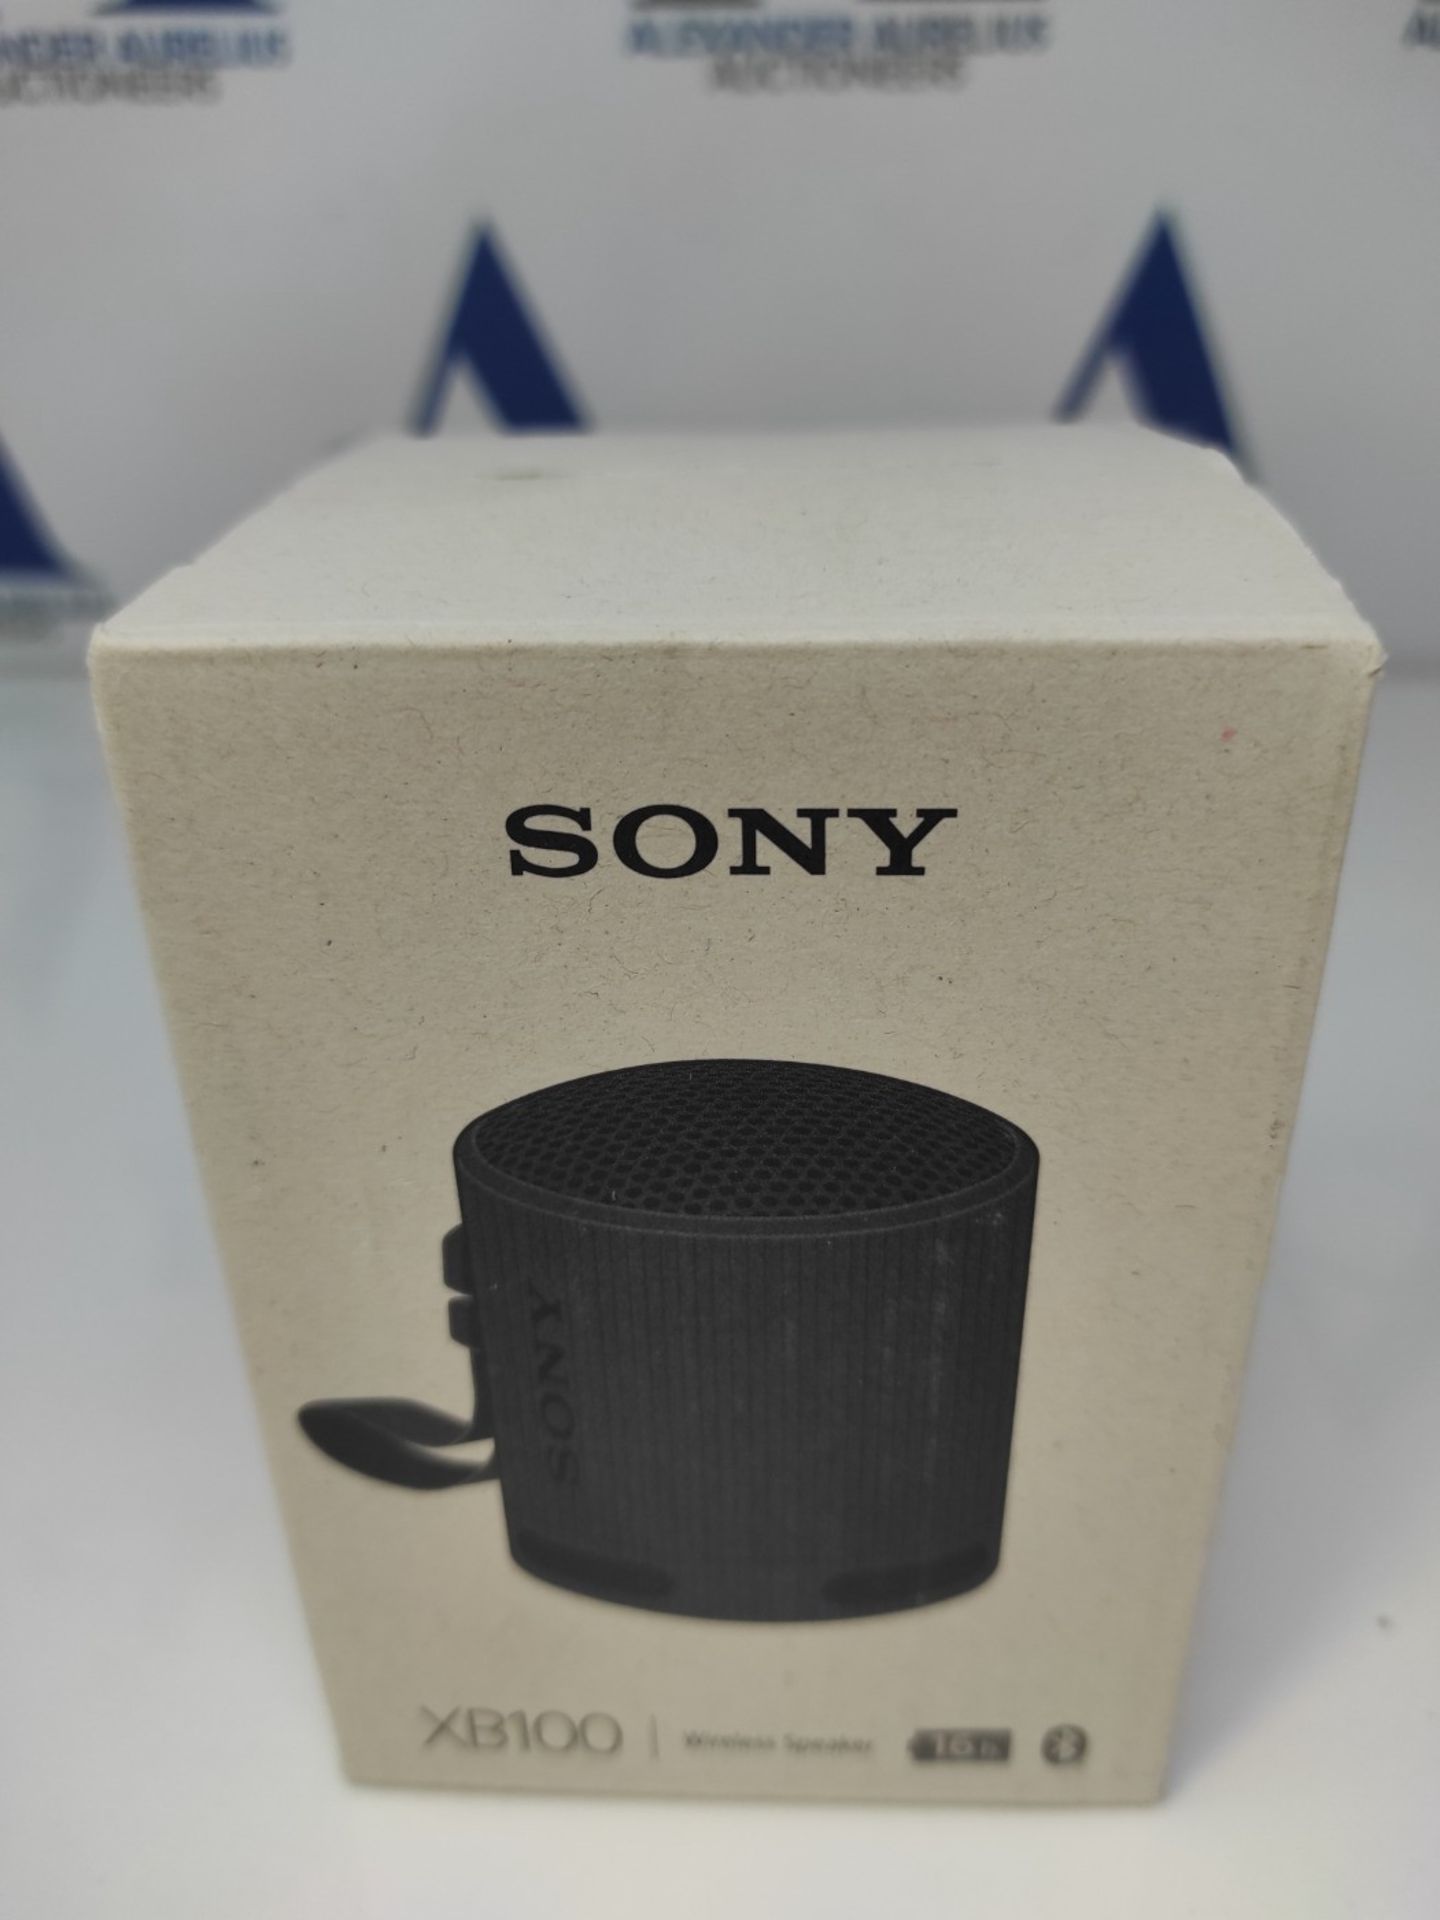 Sony SRS-XB100 - Wireless Bluetooth Speaker, Portable, Lightweight, Compact, Durable, - Image 2 of 6